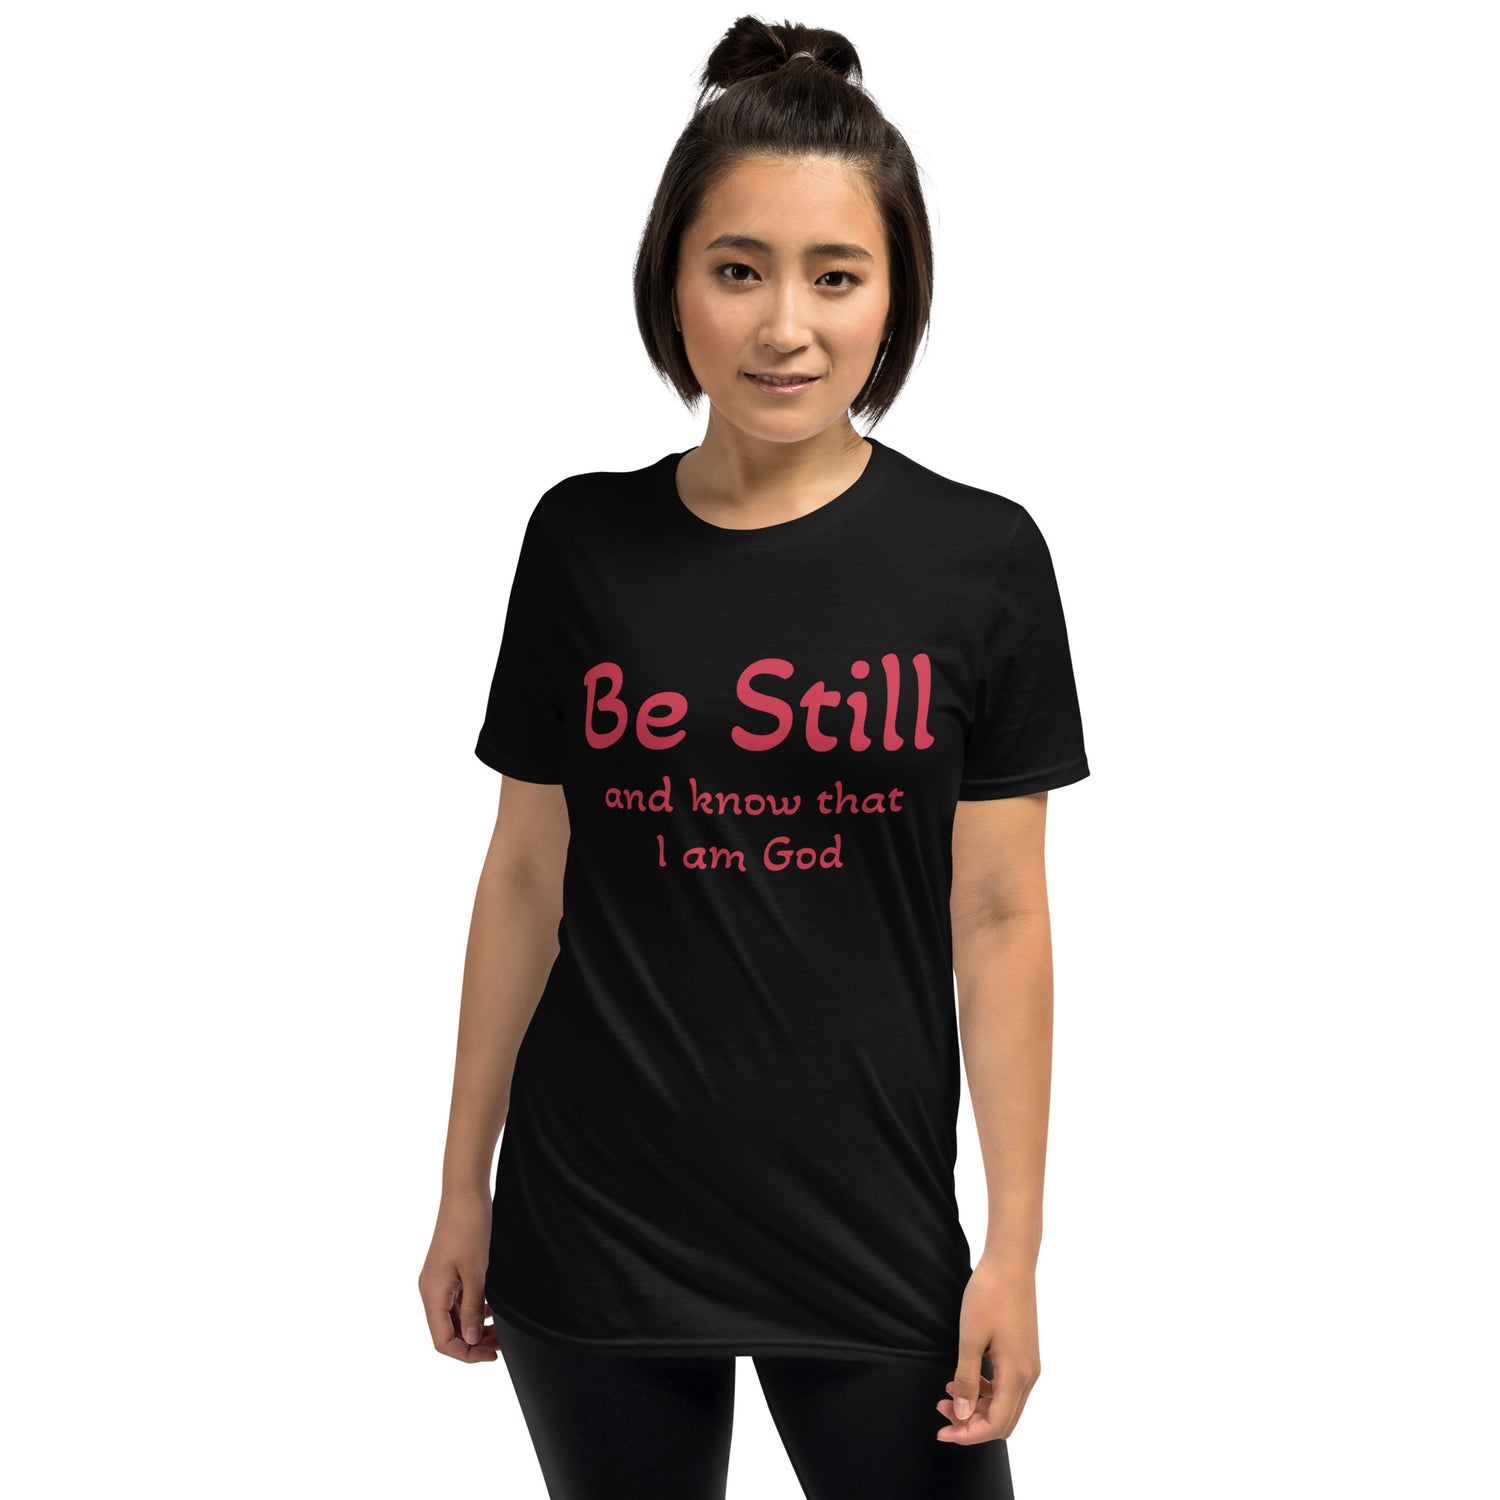 Unisex soft-style T-shirt with Be Still and Know that I am God in Red letters